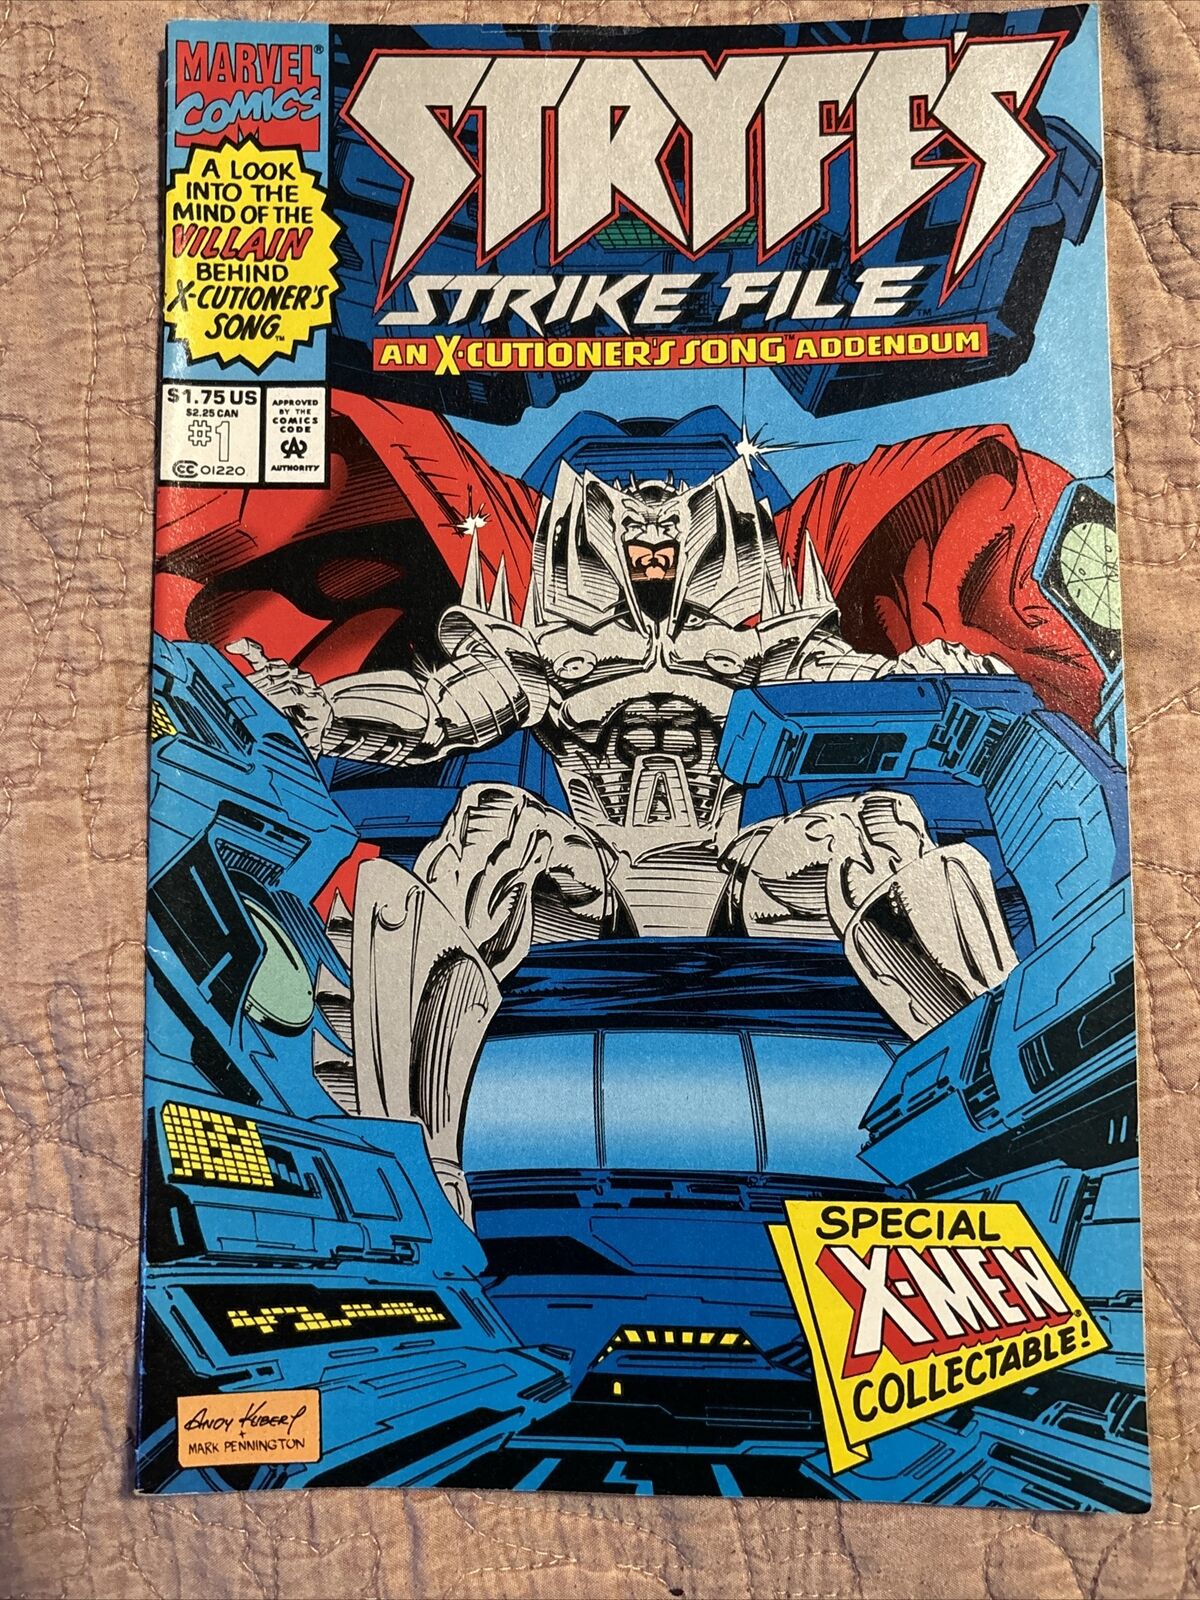 STRYFE\'S STRIKE FILE #1 1993 MARVEL COMIC SPECIAL X-MEN COLLECTABLE ANDY KUBERT